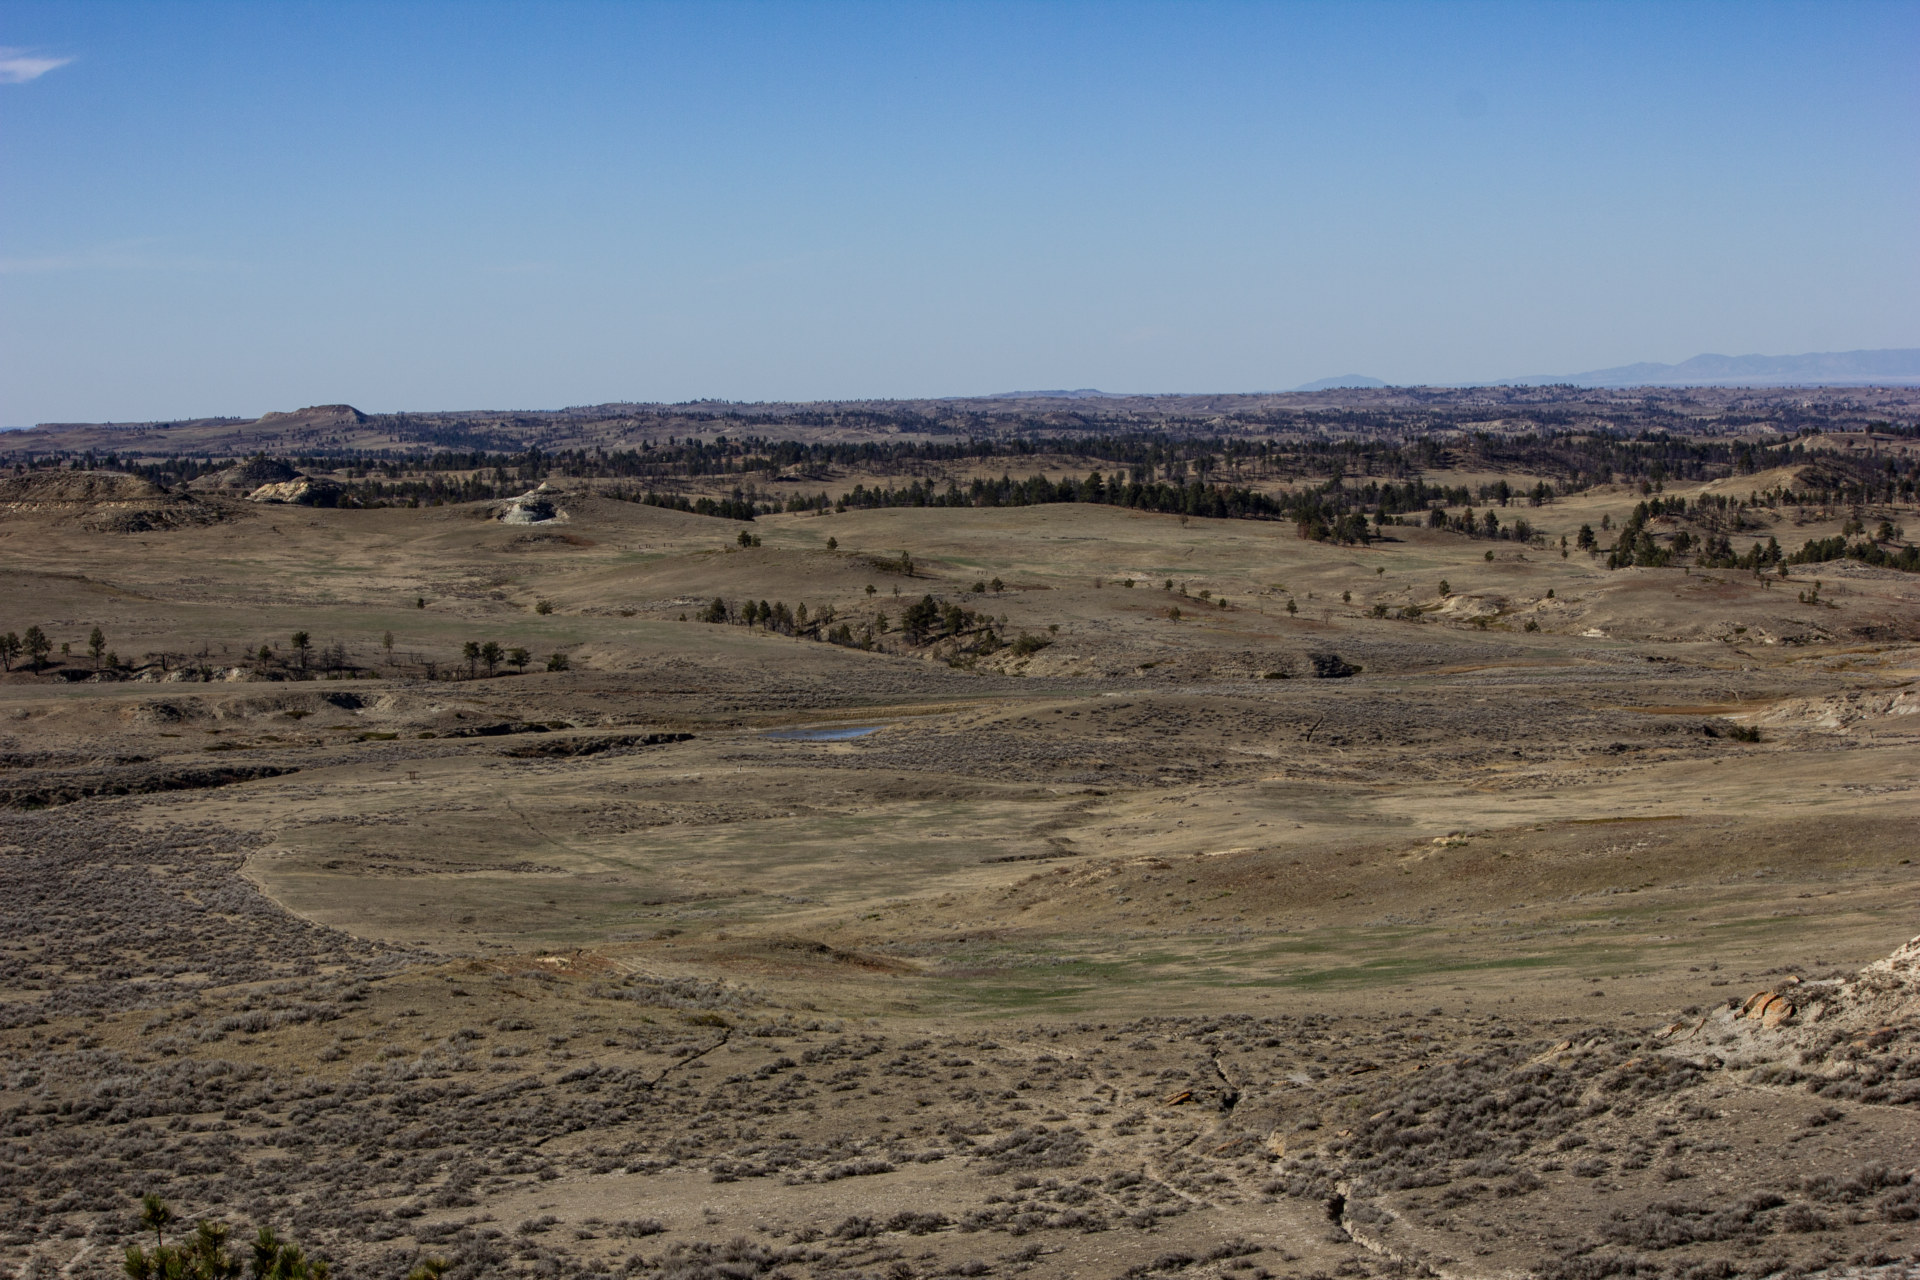 Looking northwest on the Montana Missouri River Breaks Square Butte Ranch